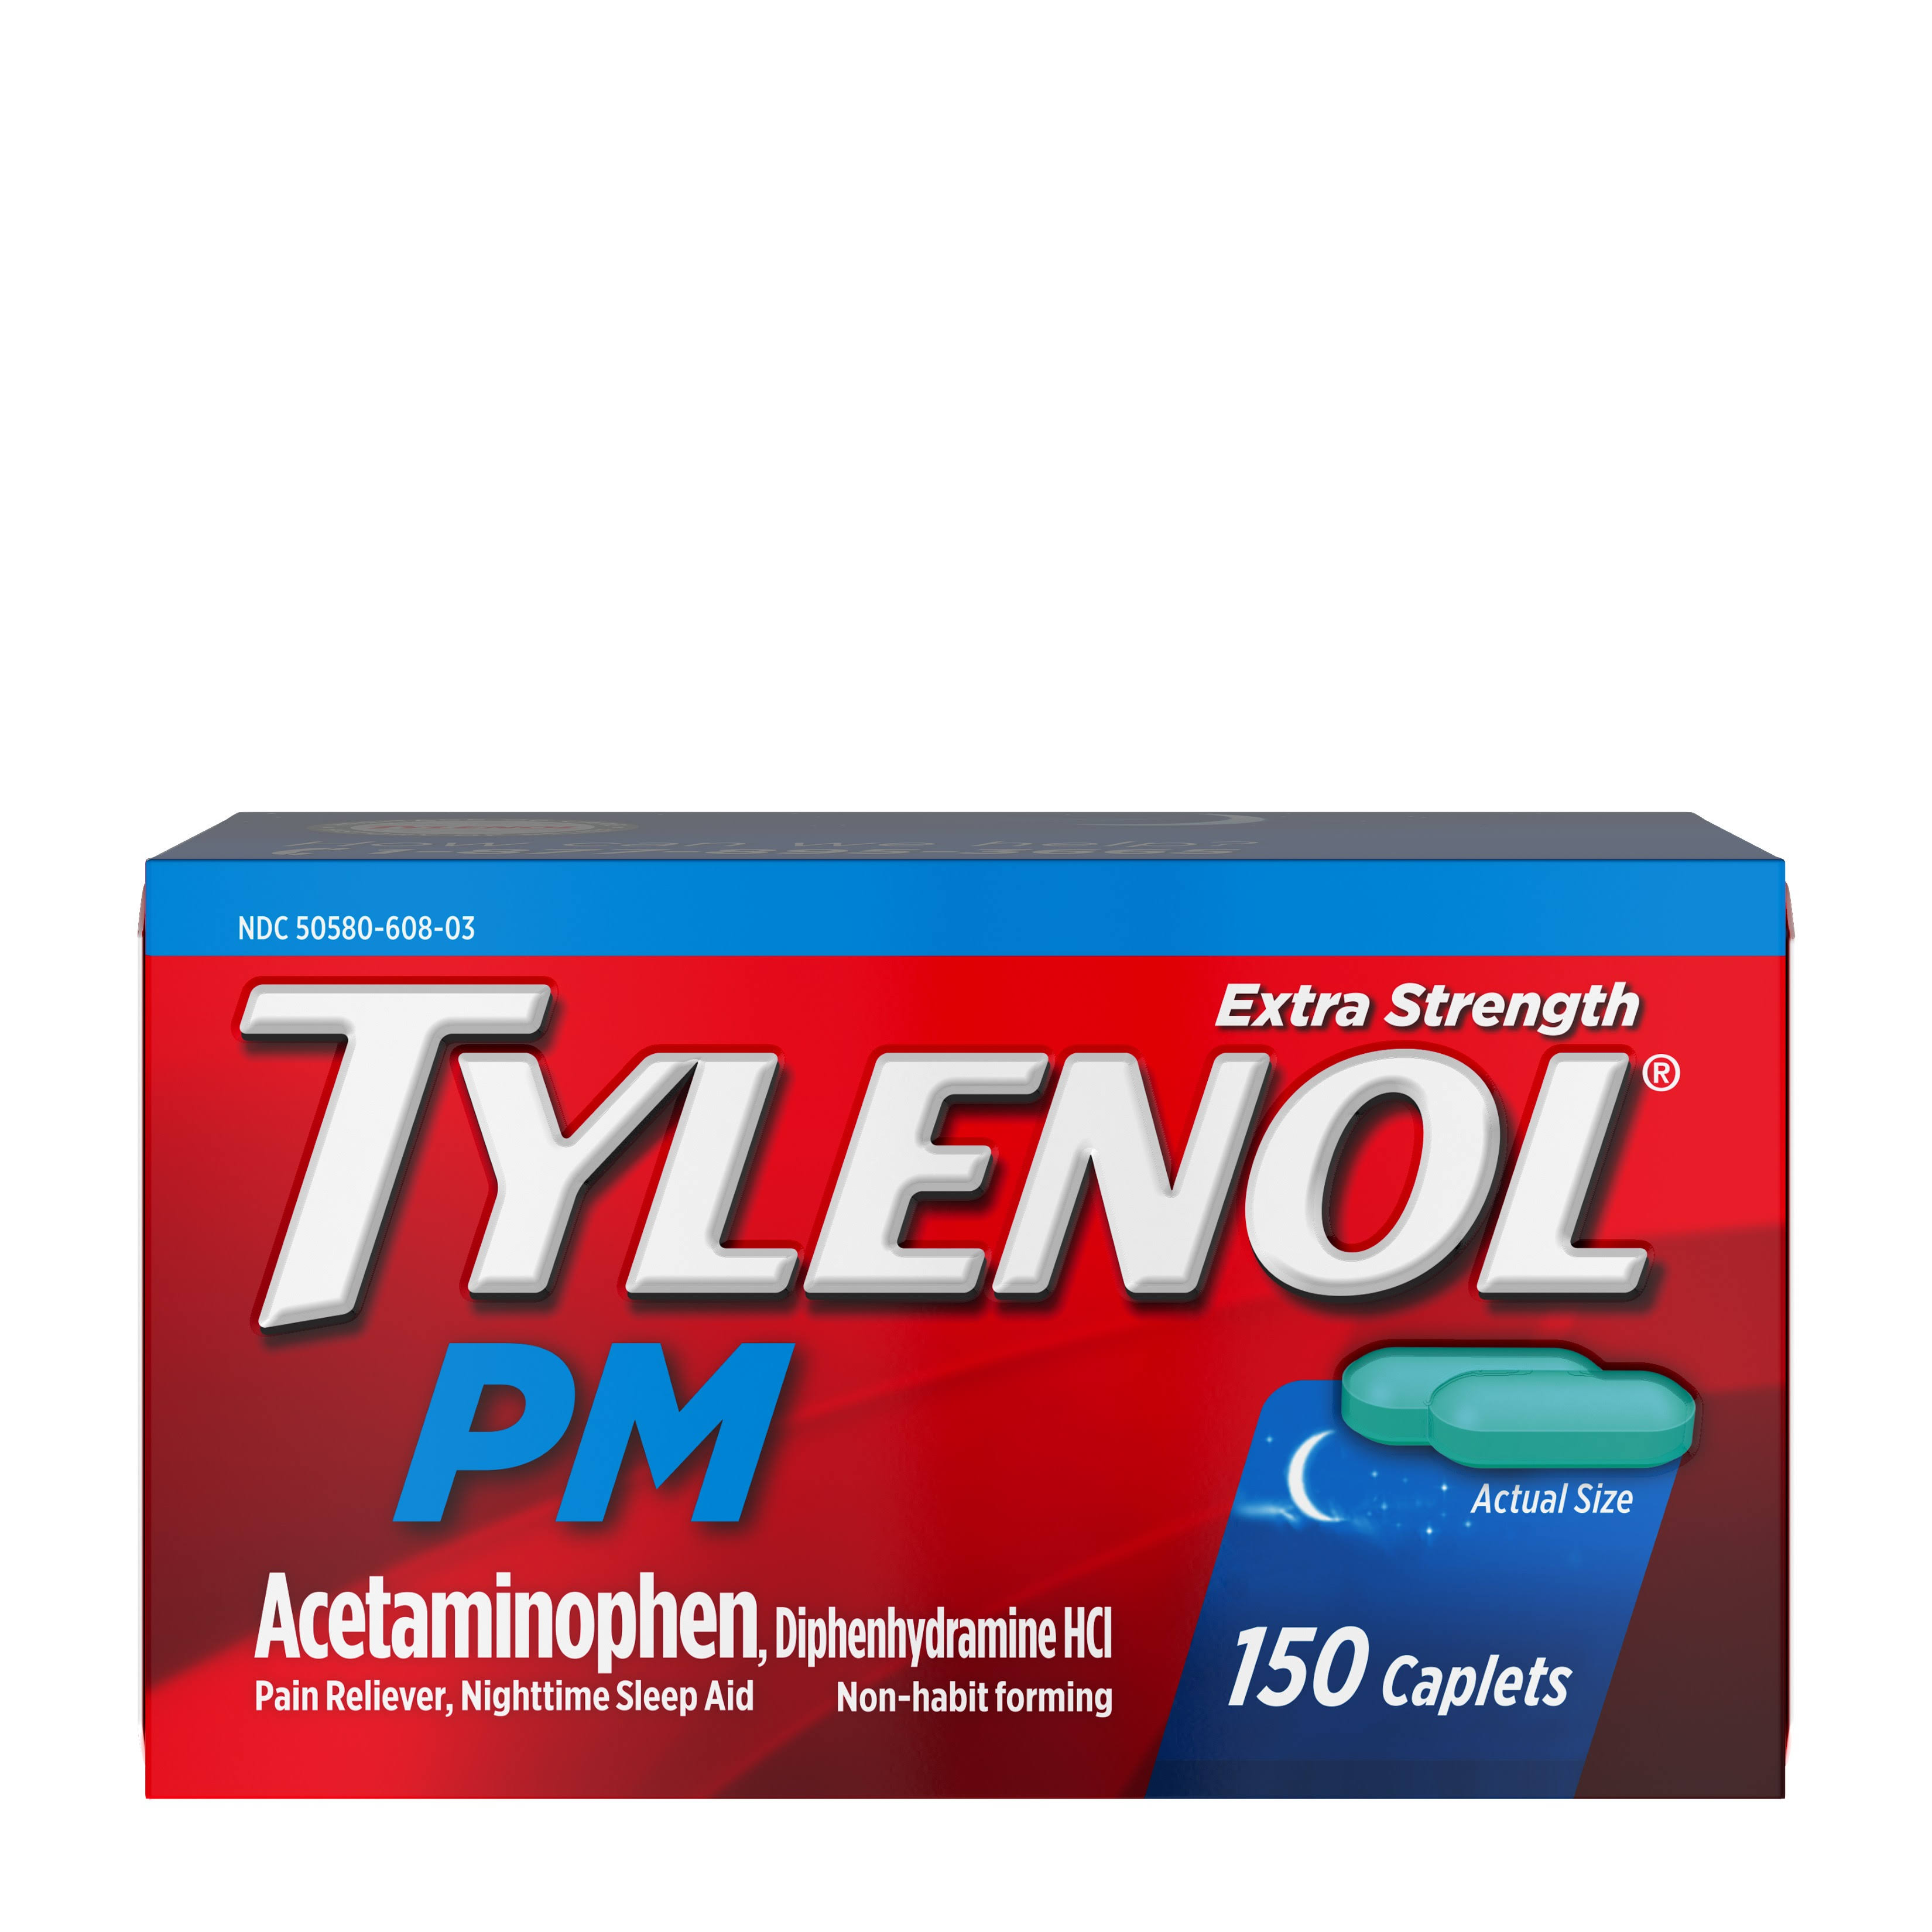 Tylenol Extra Strength PM Aceminophen Caplets - 150ct